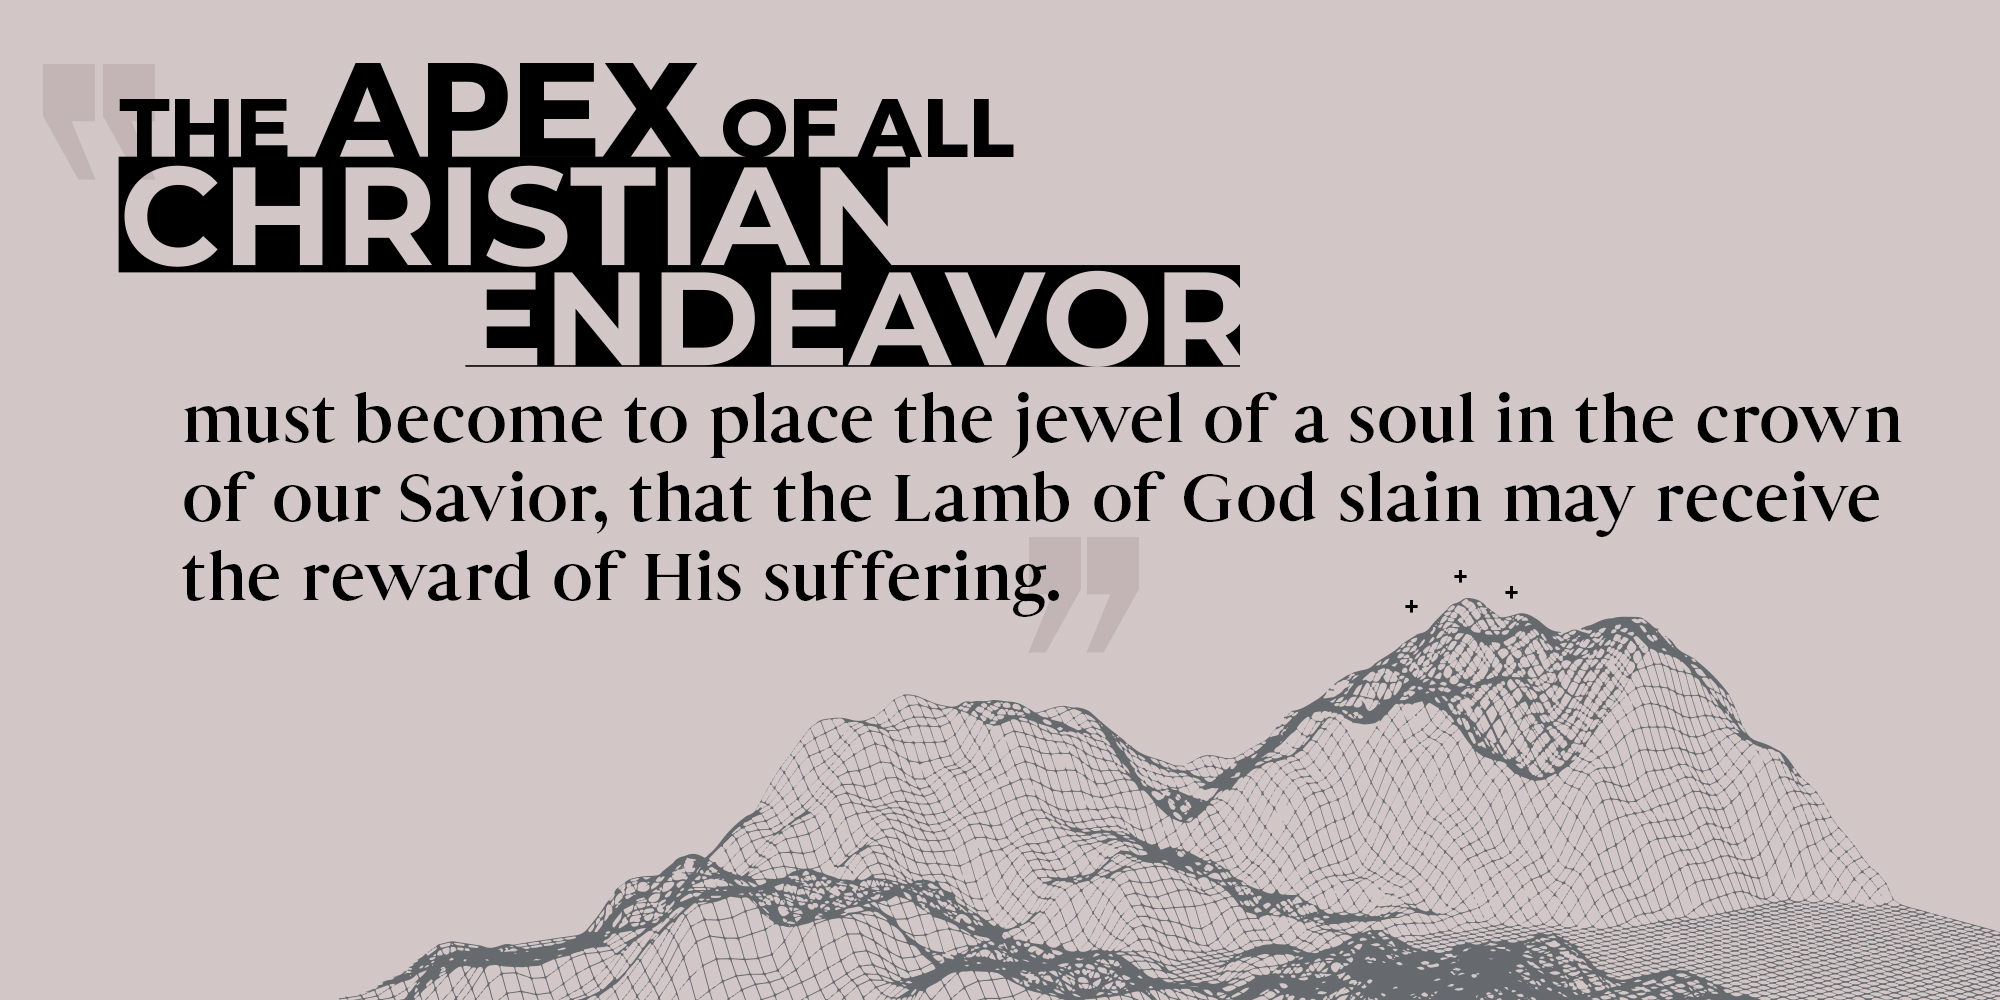 The Apex of ALL Christian endeavor must become to place the jewel of a soul in the crown of our Savior, that the Lamb of God slain may receive the reward of His suffering.